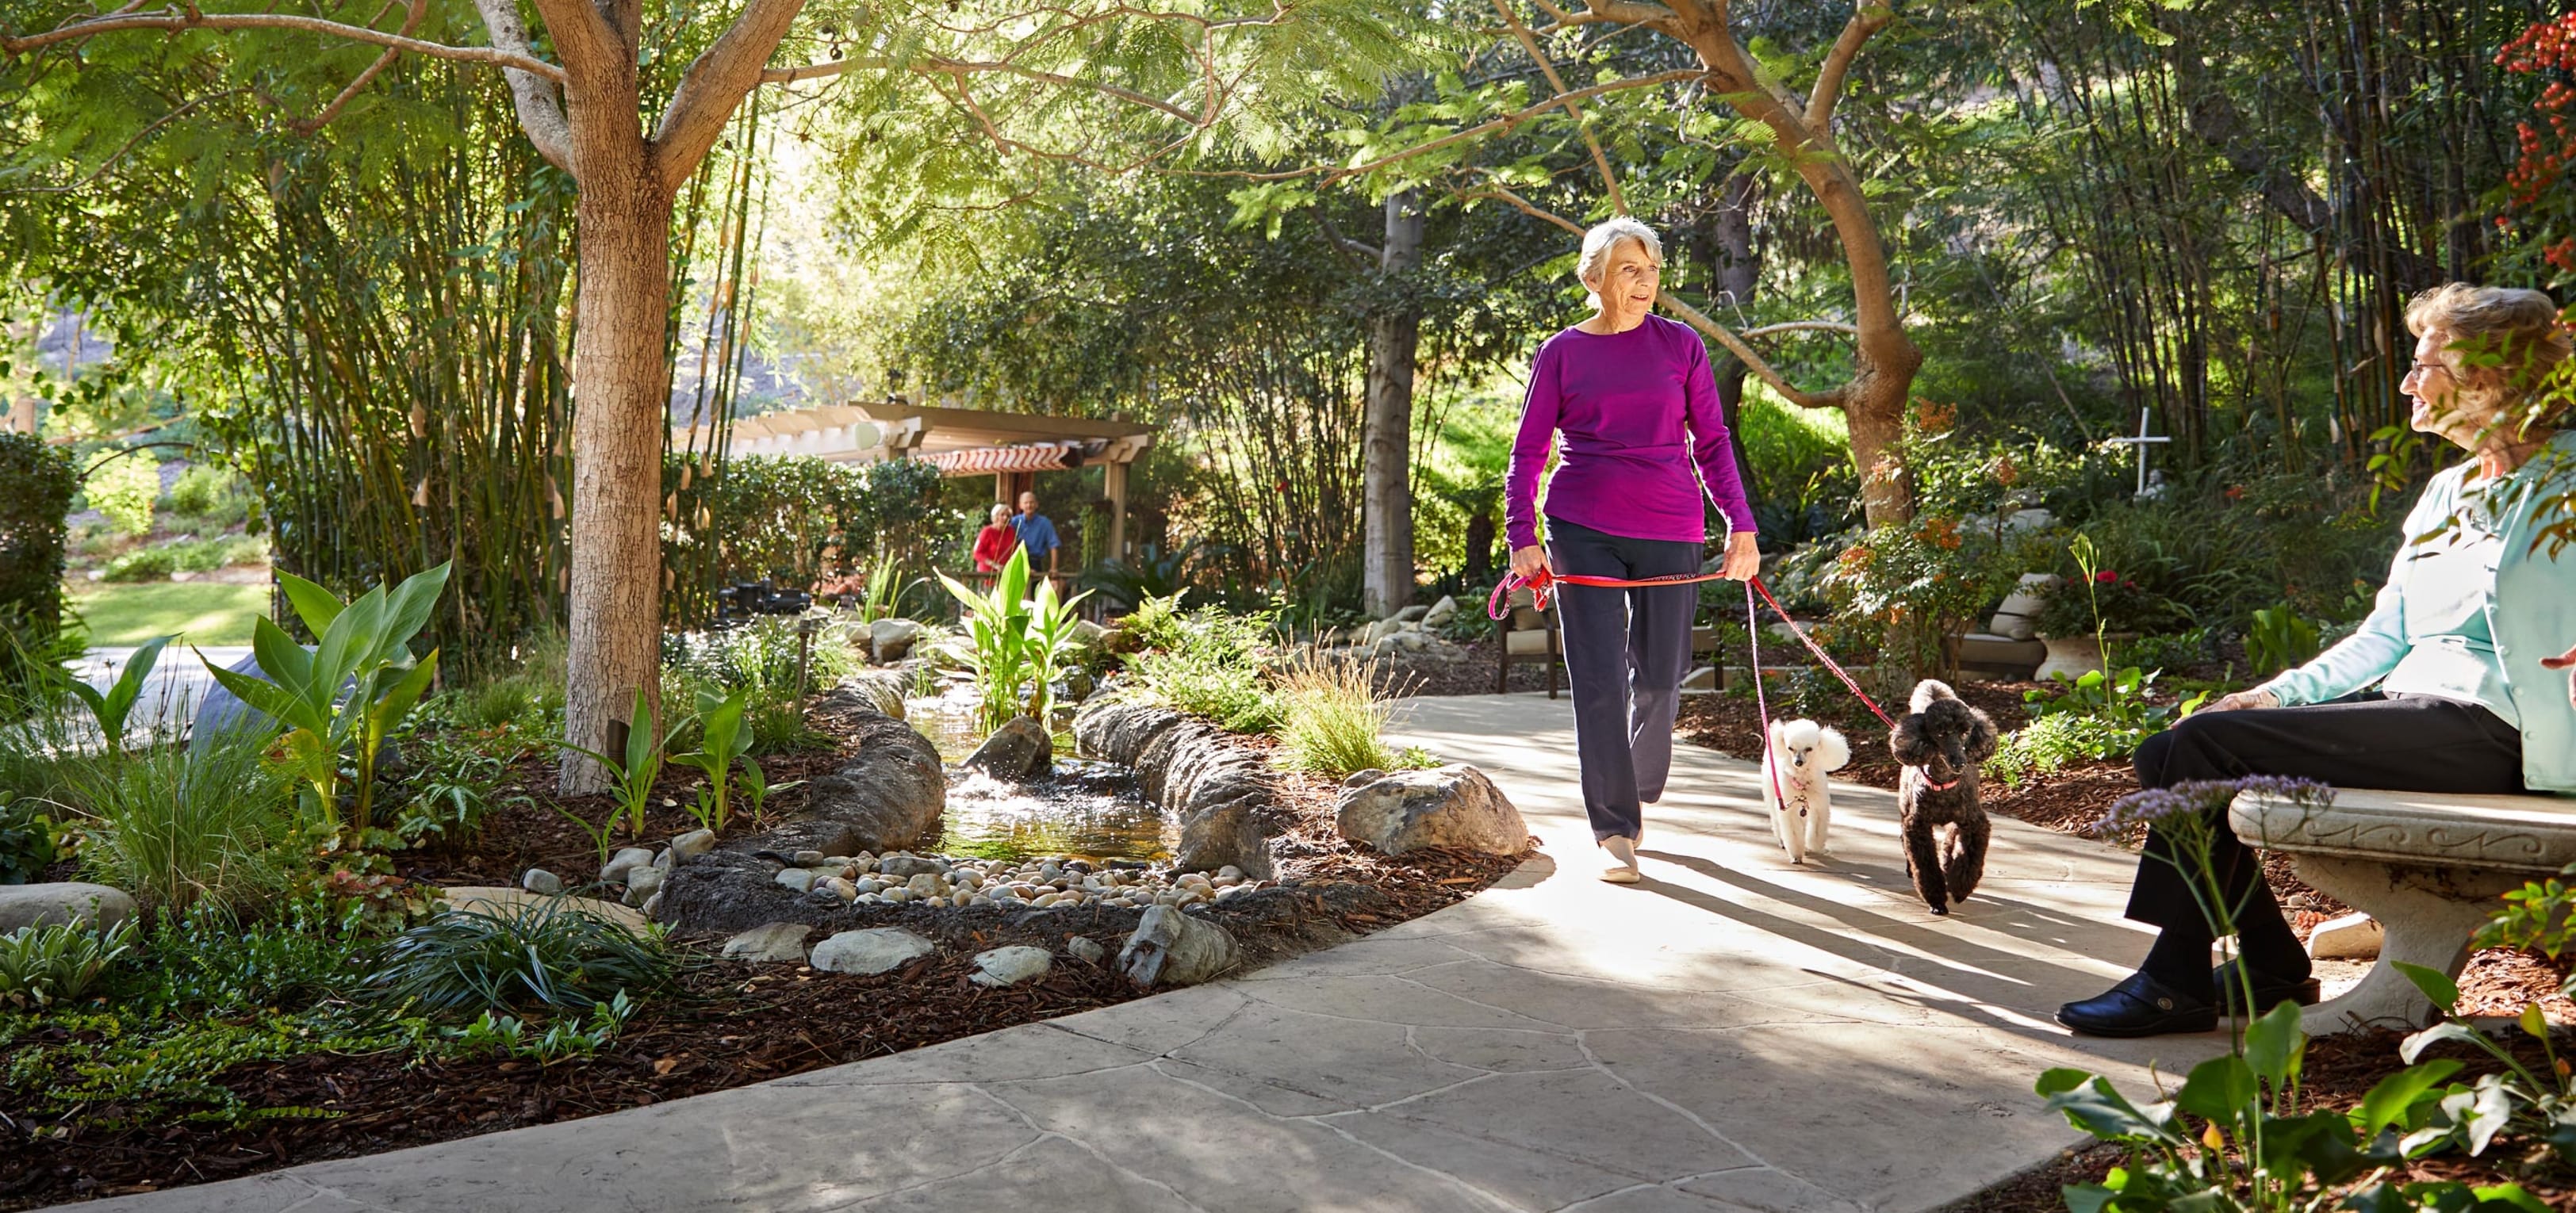 woman walking two dogs on garden path while another woman sits on bench